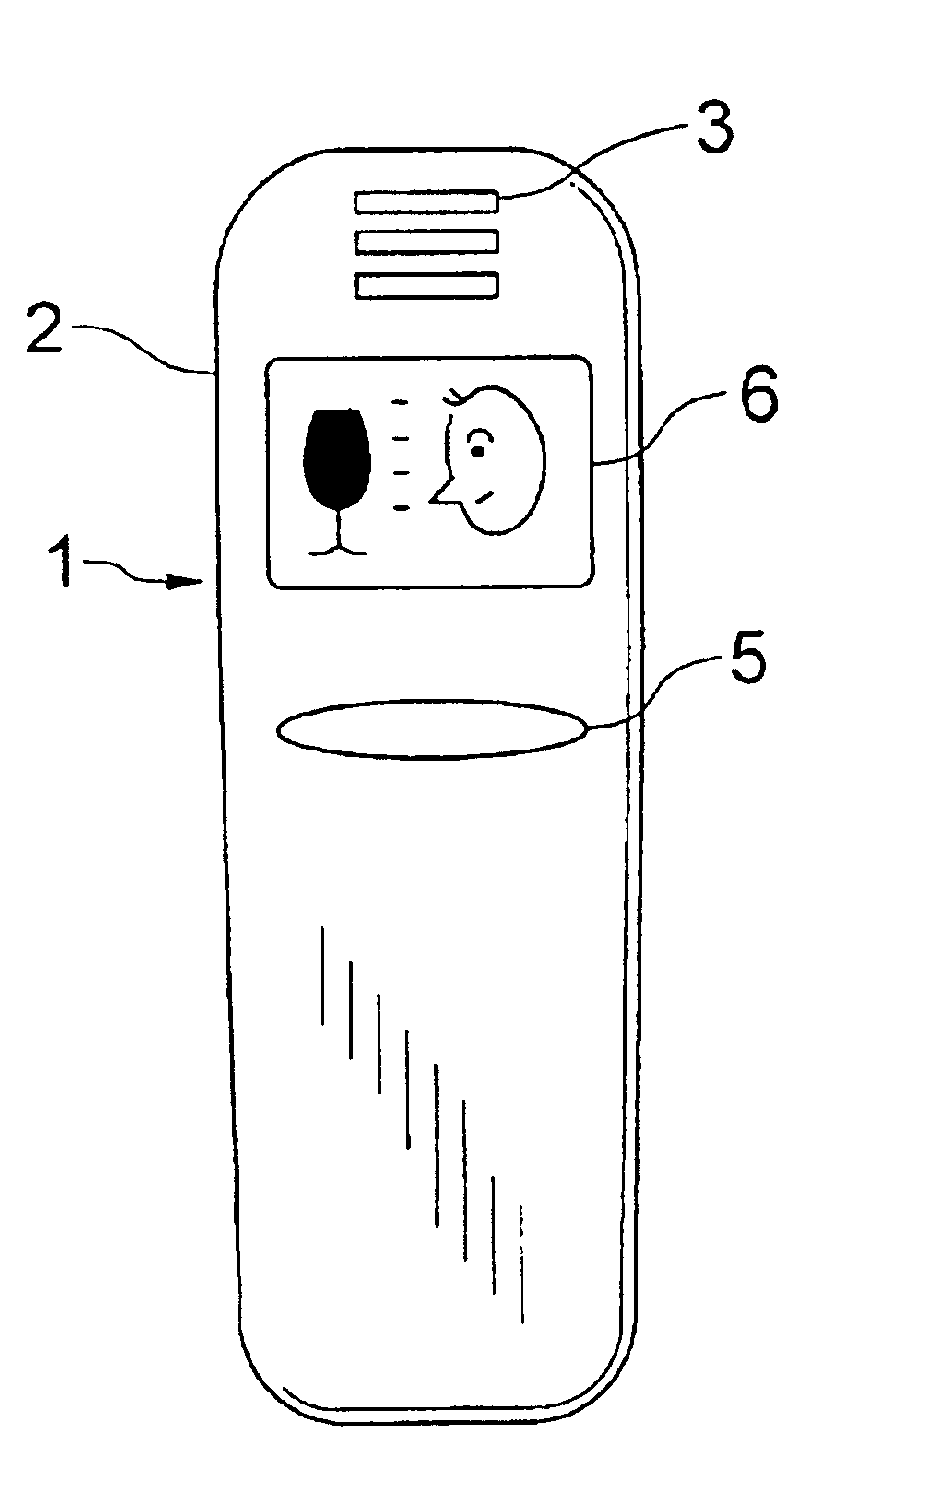 Exhalation gaseous component gauge and a cellular phone equipped with function of measuring gaseous components